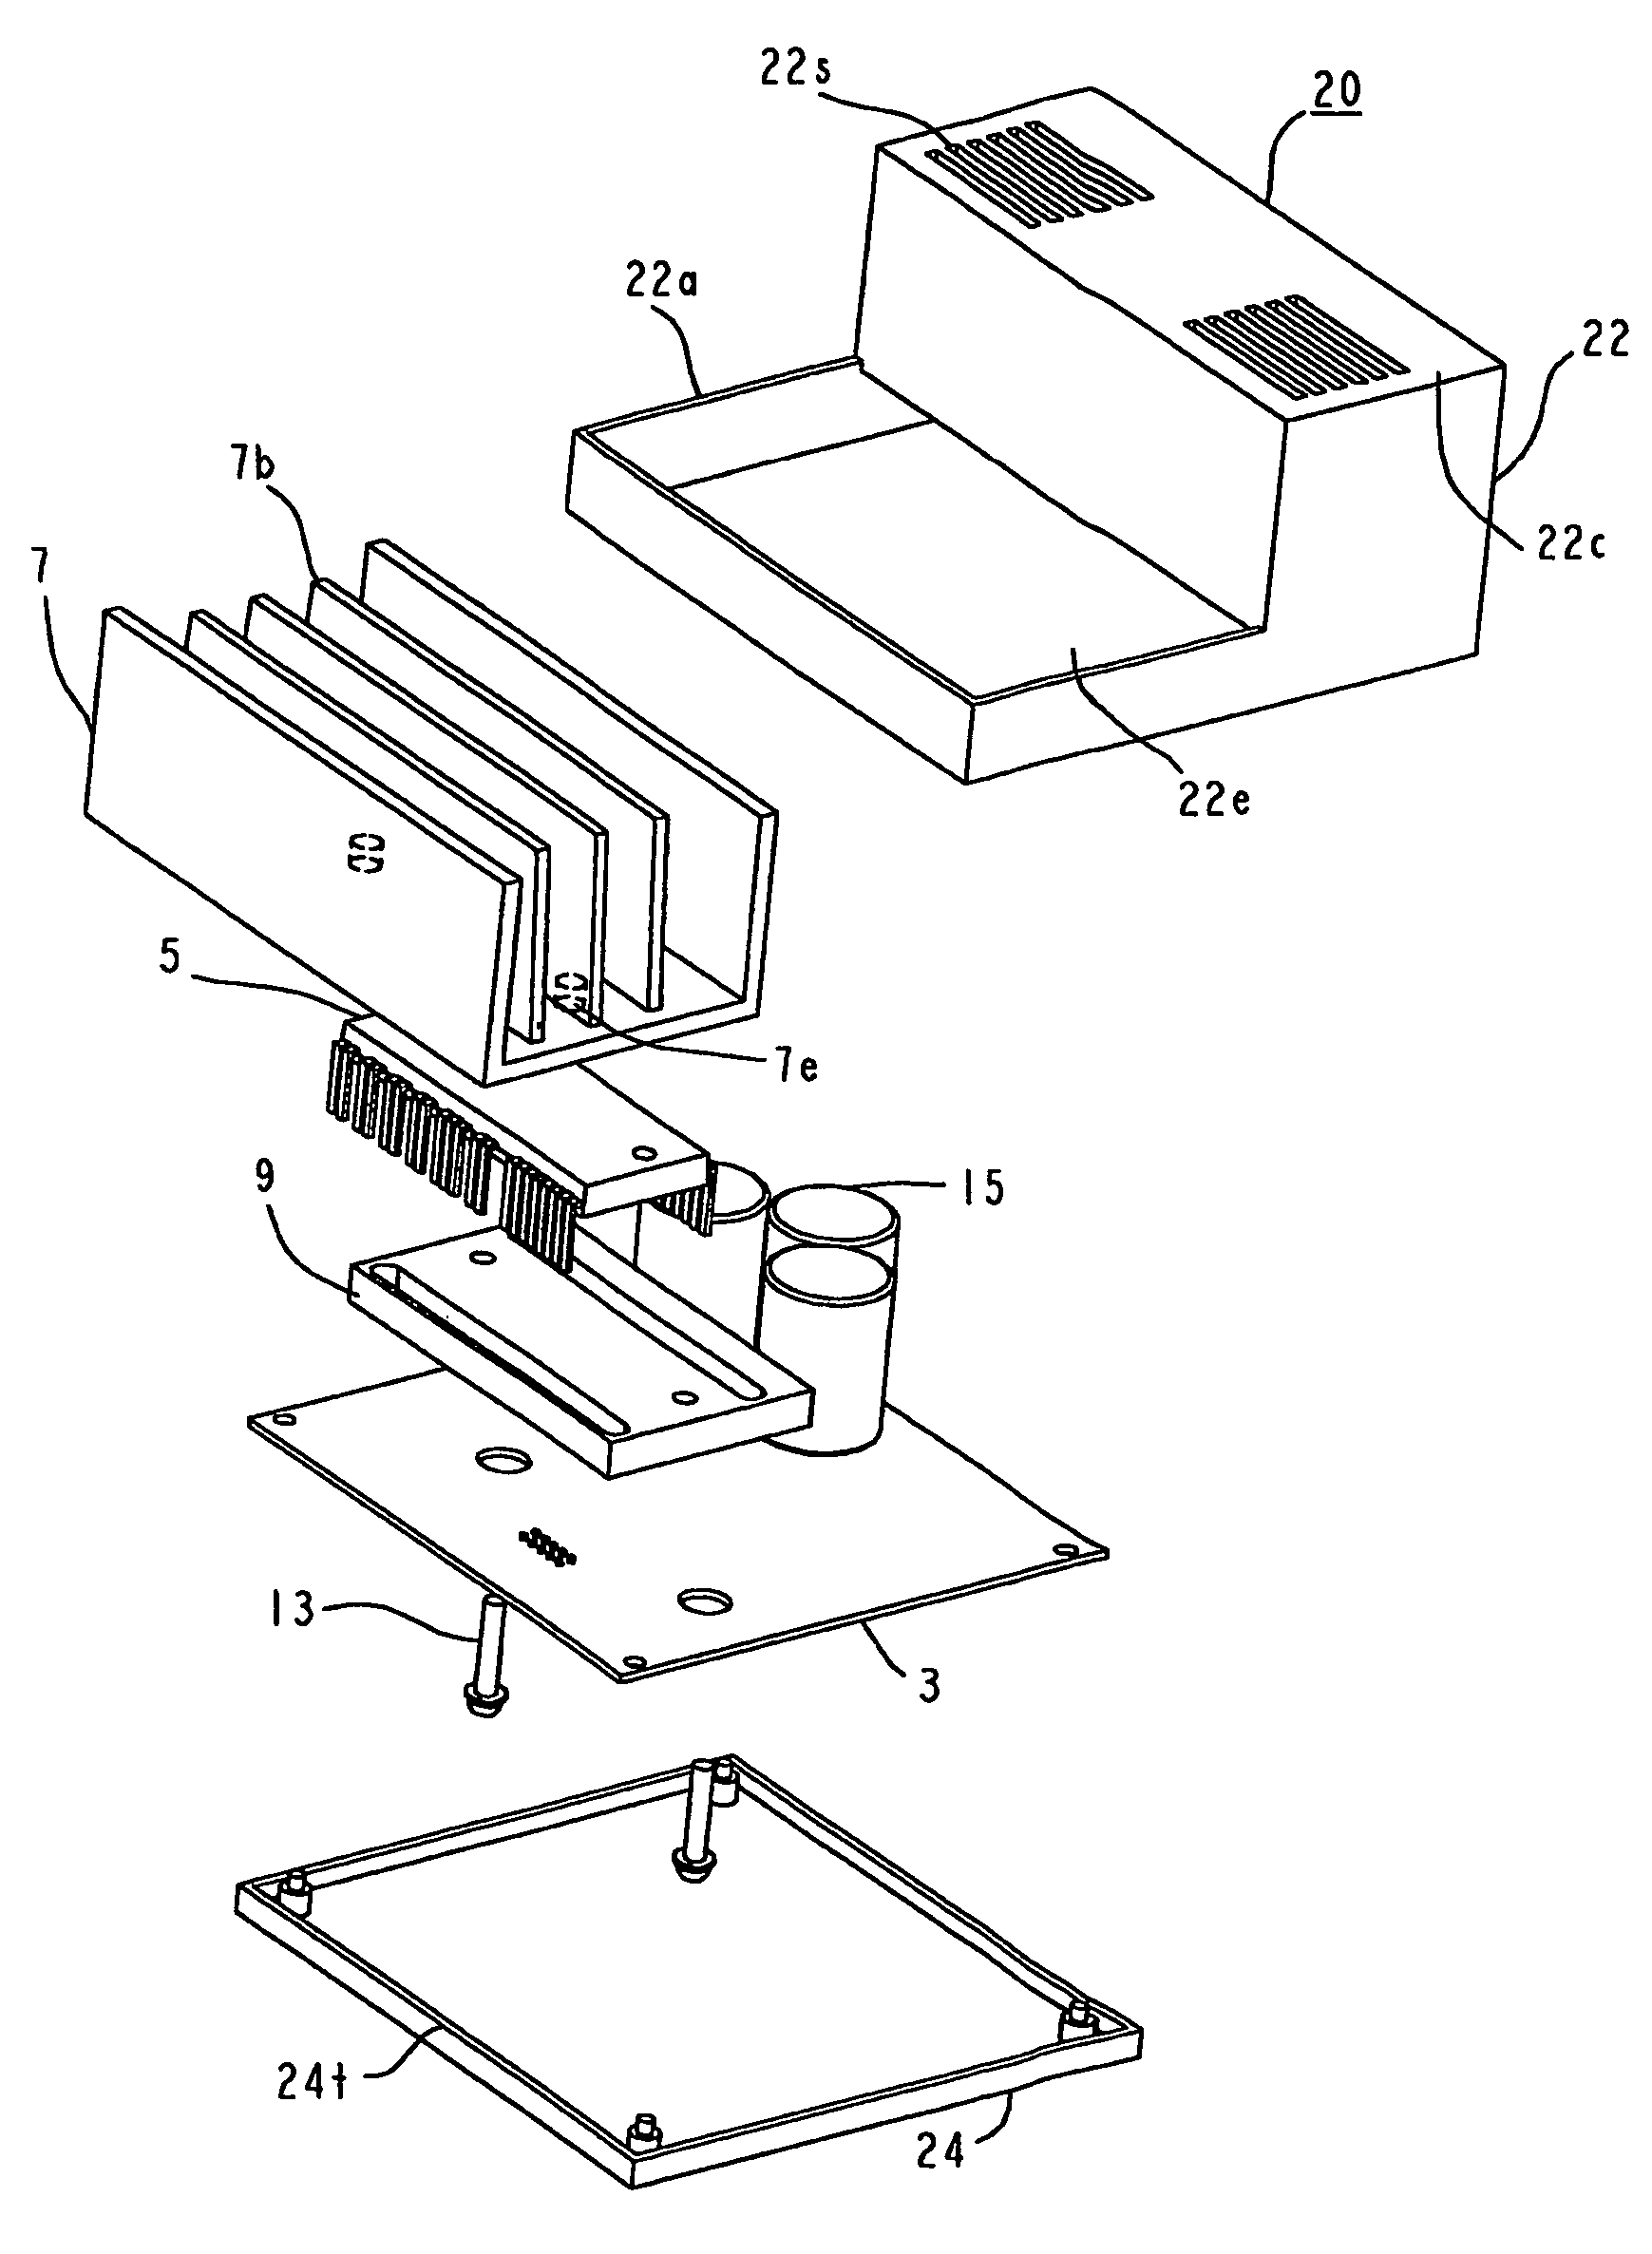 Modular heat-radiation structure and controller including the structure